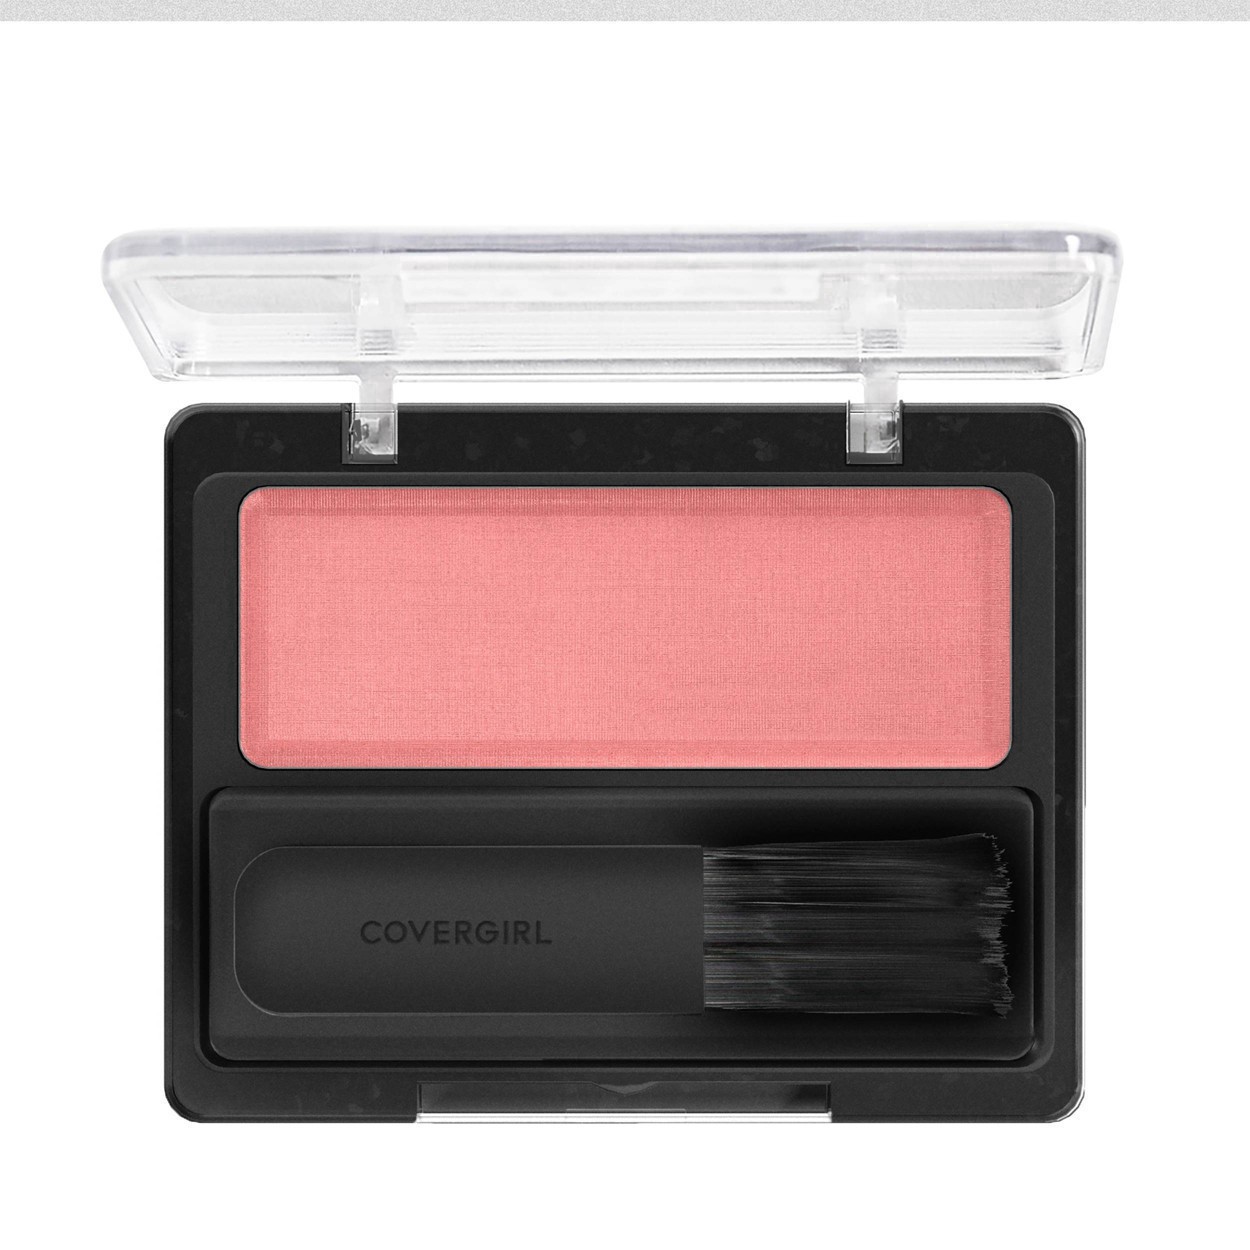 slide 31 of 42, COTY COVERGIRL COVERGIRL Classic Color Blush Rose Silk, 1 ct